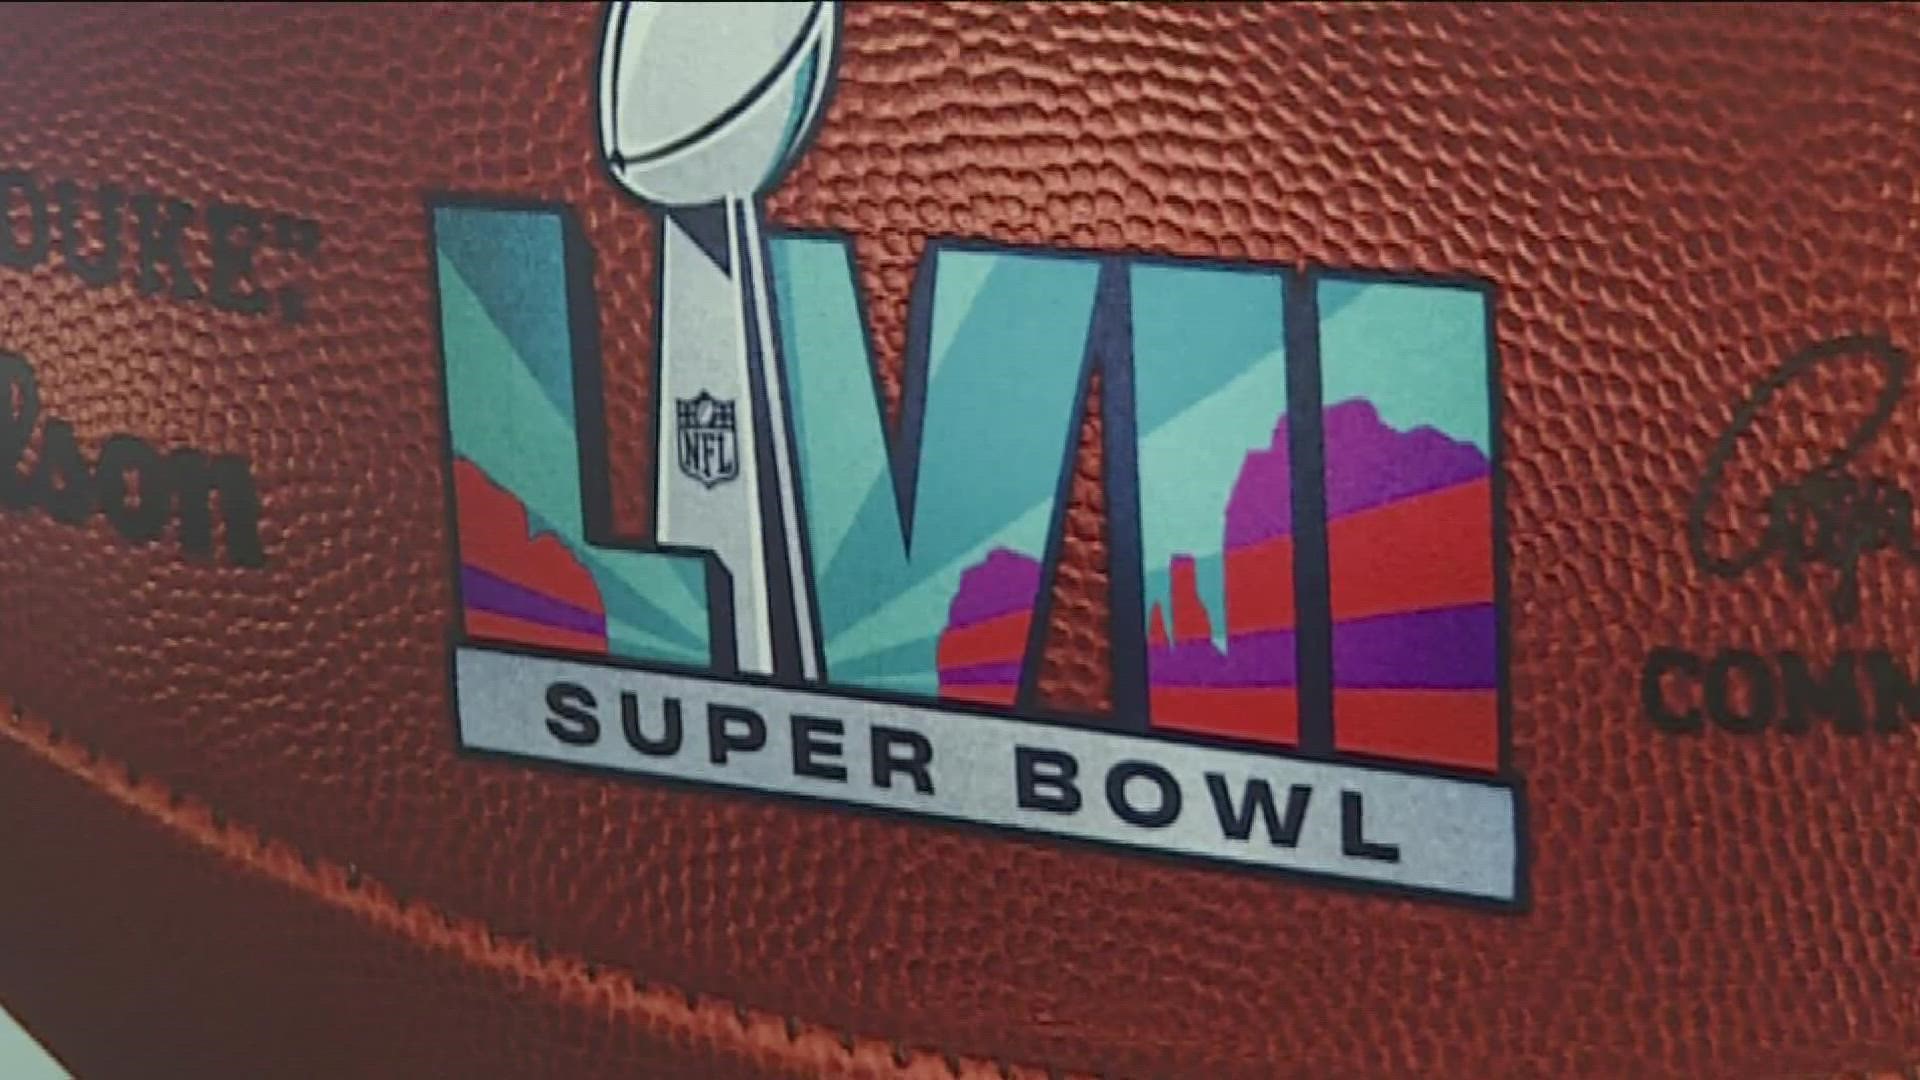 And even though Super Bowl is more than 5 months away, hotels in the Phoenix metro area are already getting booked up.